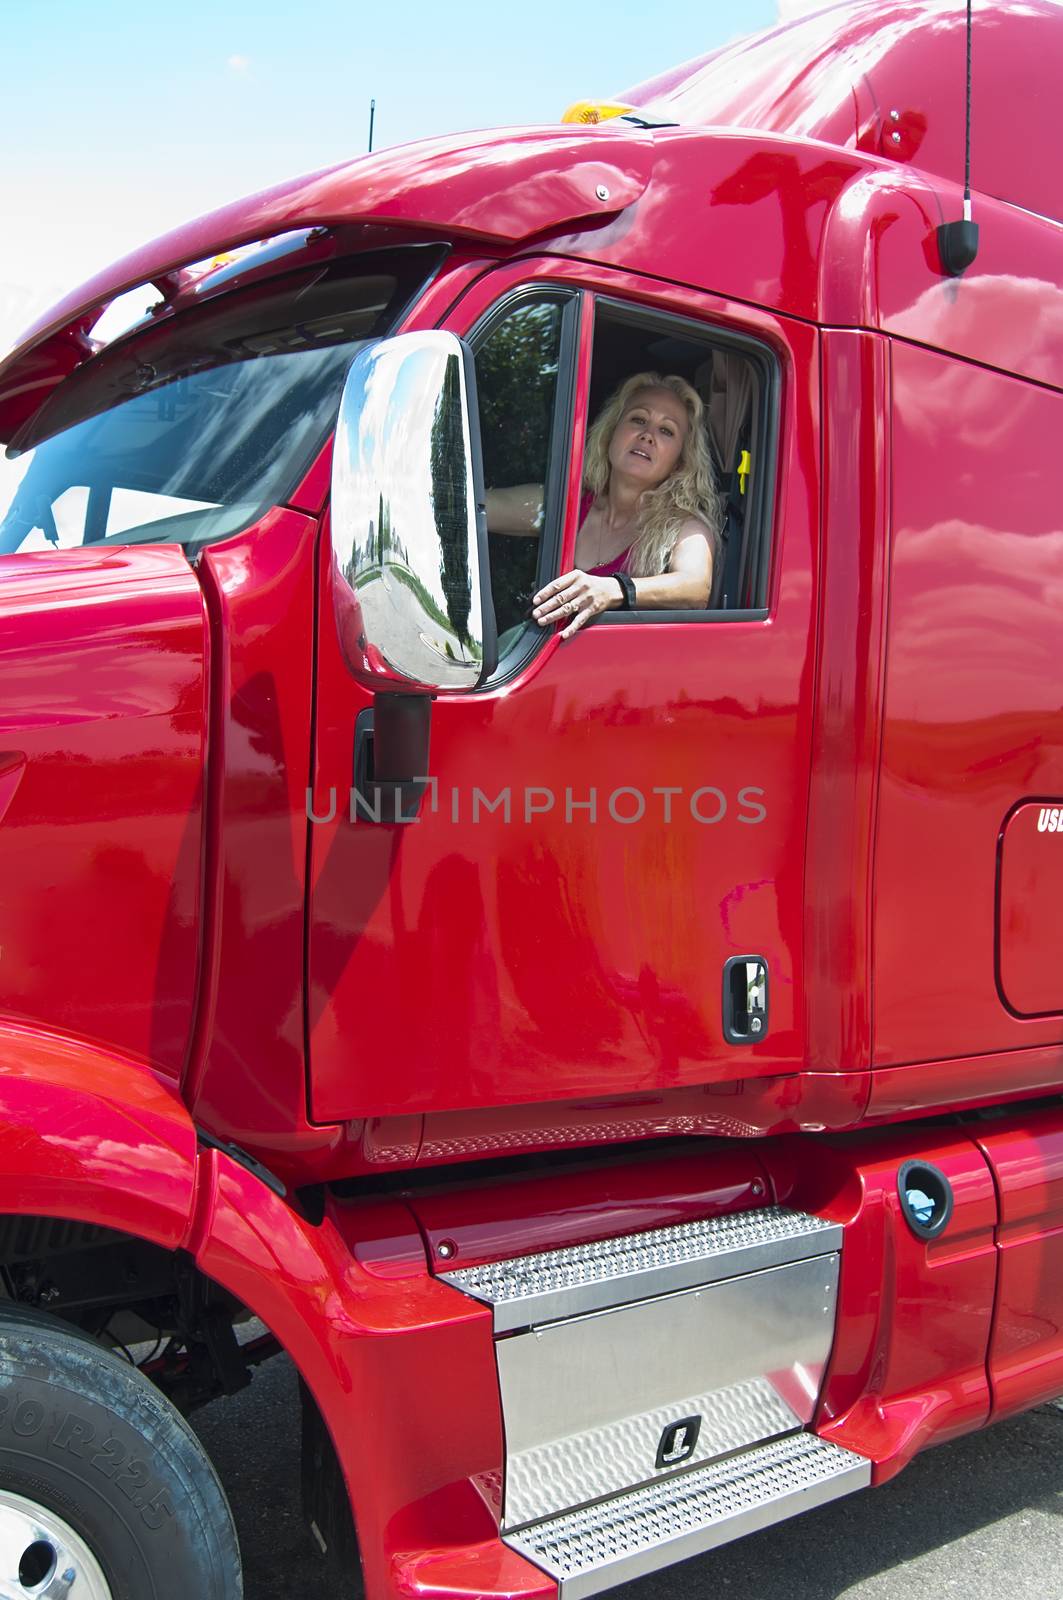 Blonde Woman truckdriver by rcarner